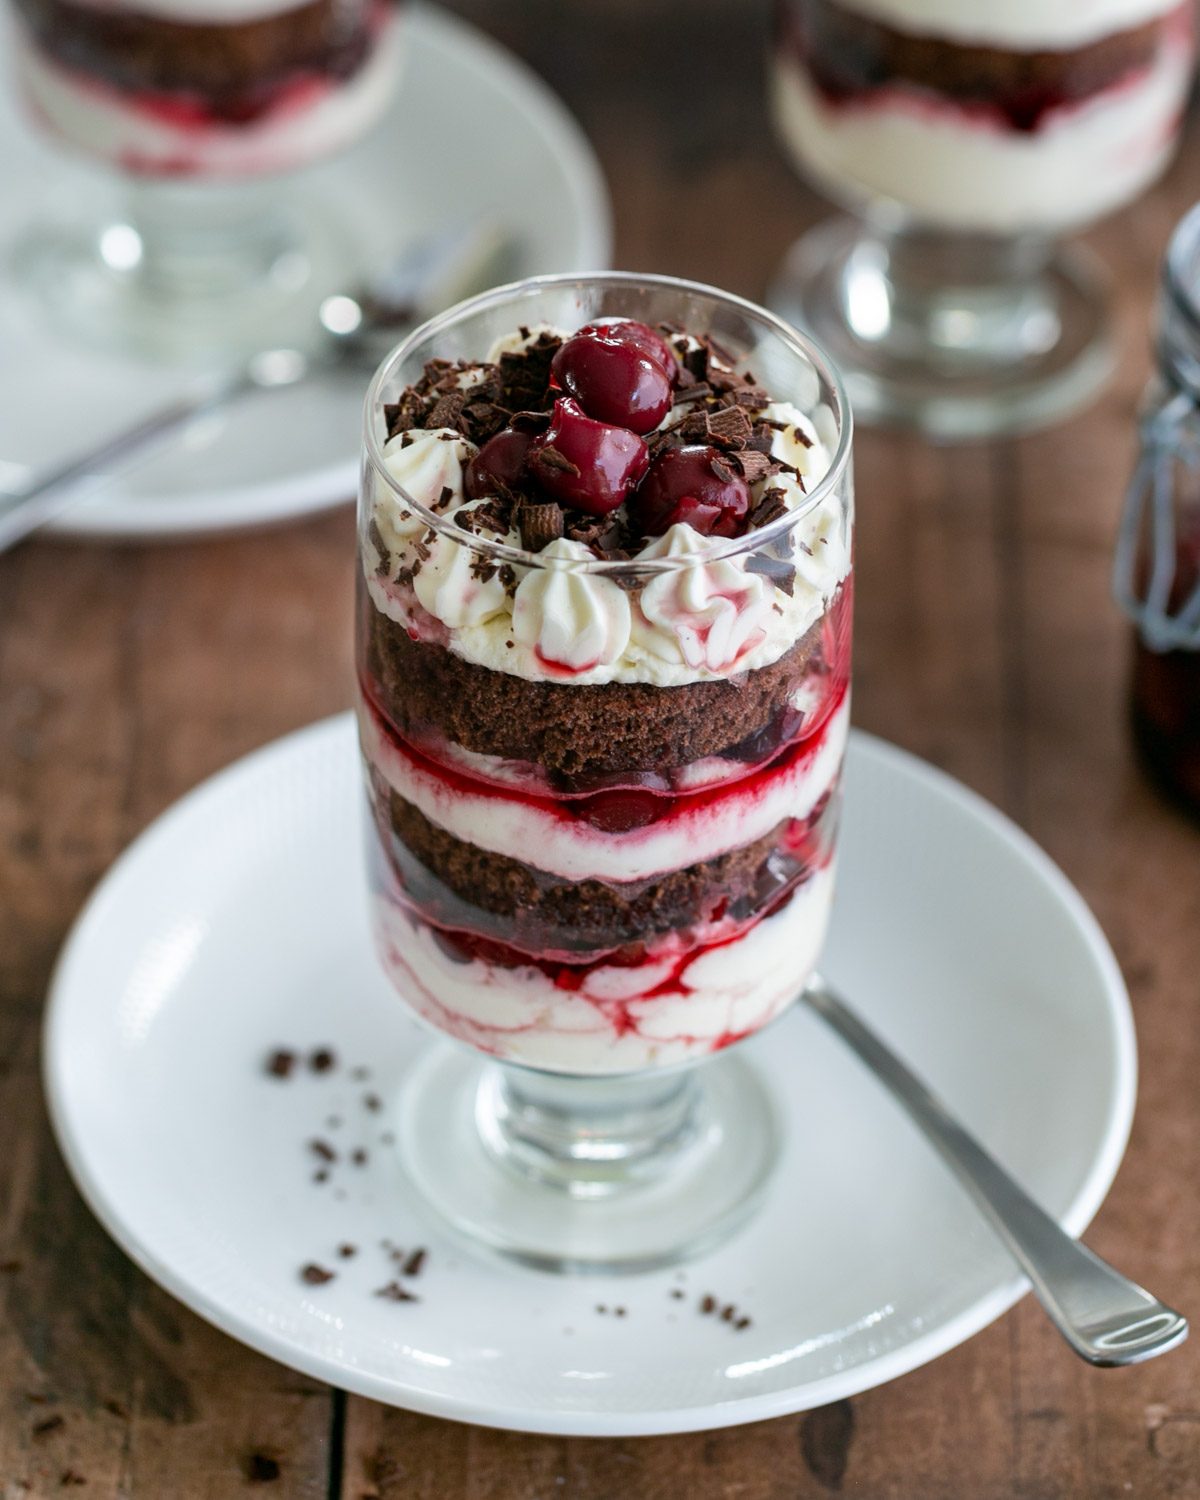 Black forest cake presented in a tall glass